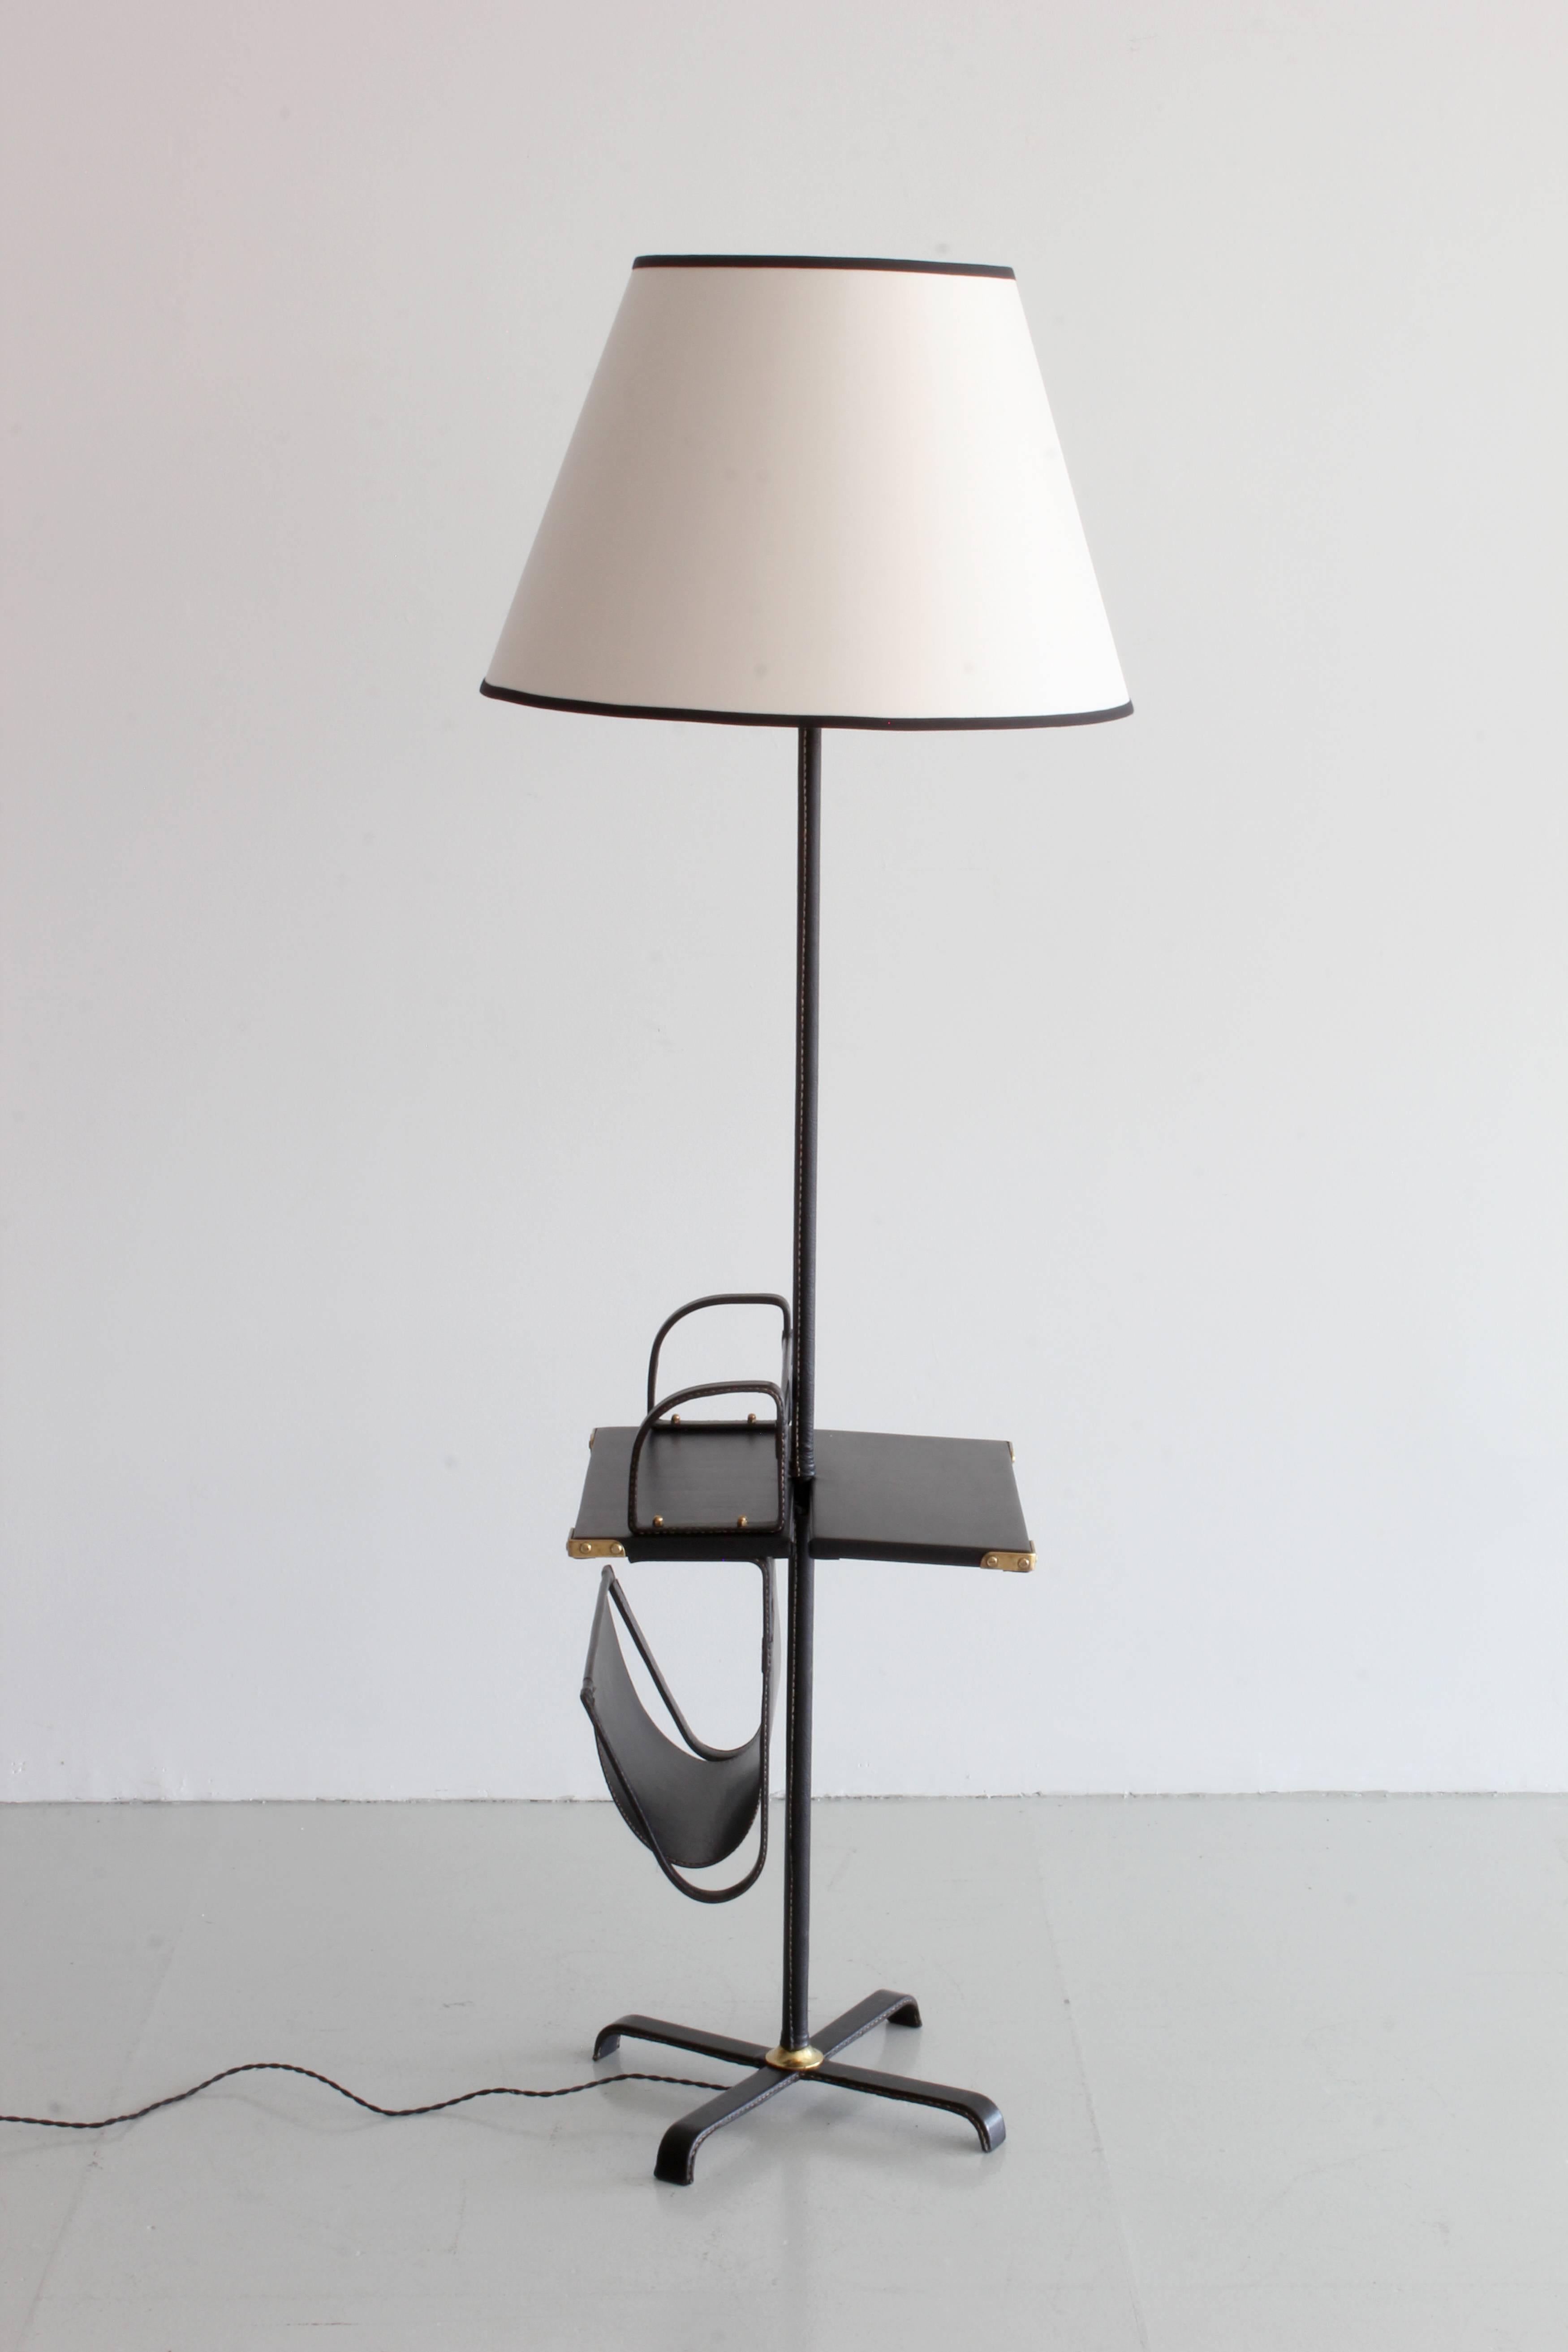 Leather Jacques Adnet Table Floor Lamp